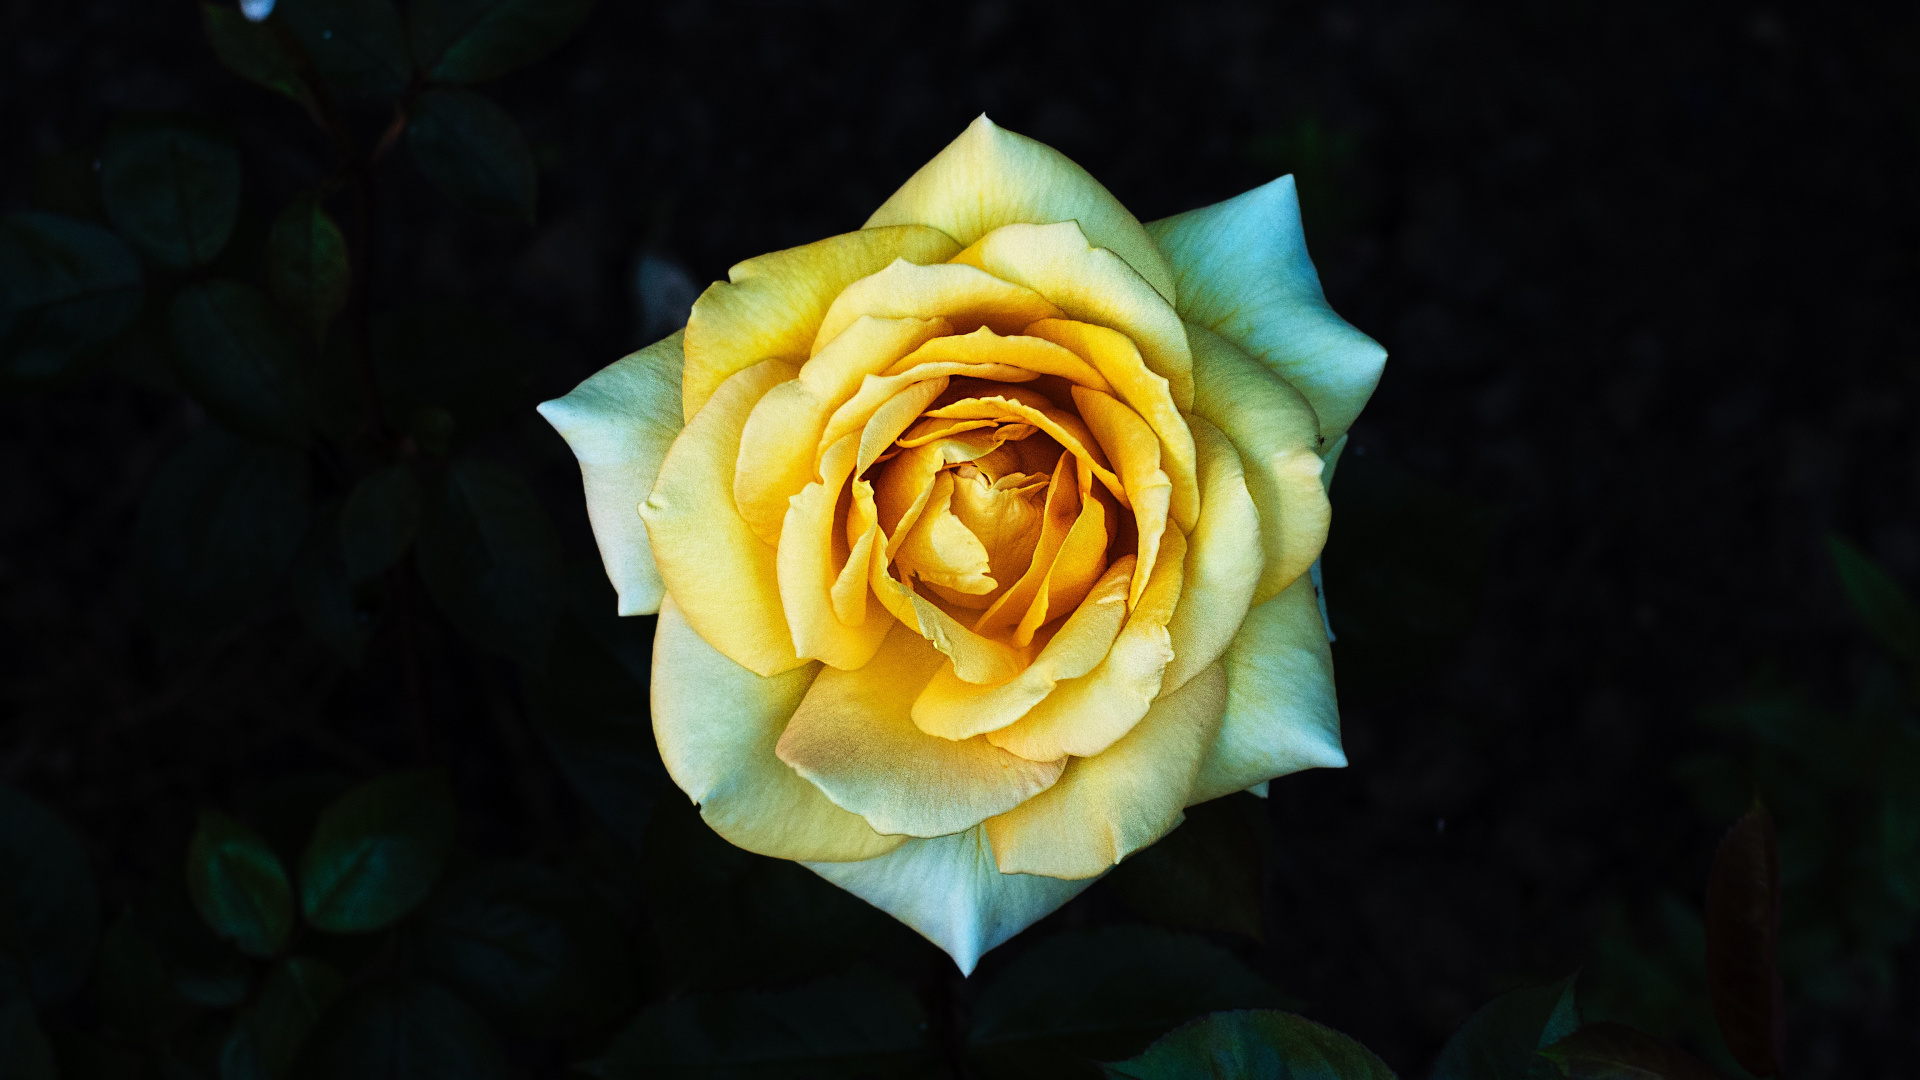 Yellow Rose in Bloom Close up Photo. Wallpaper in 1920x1080 Resolution